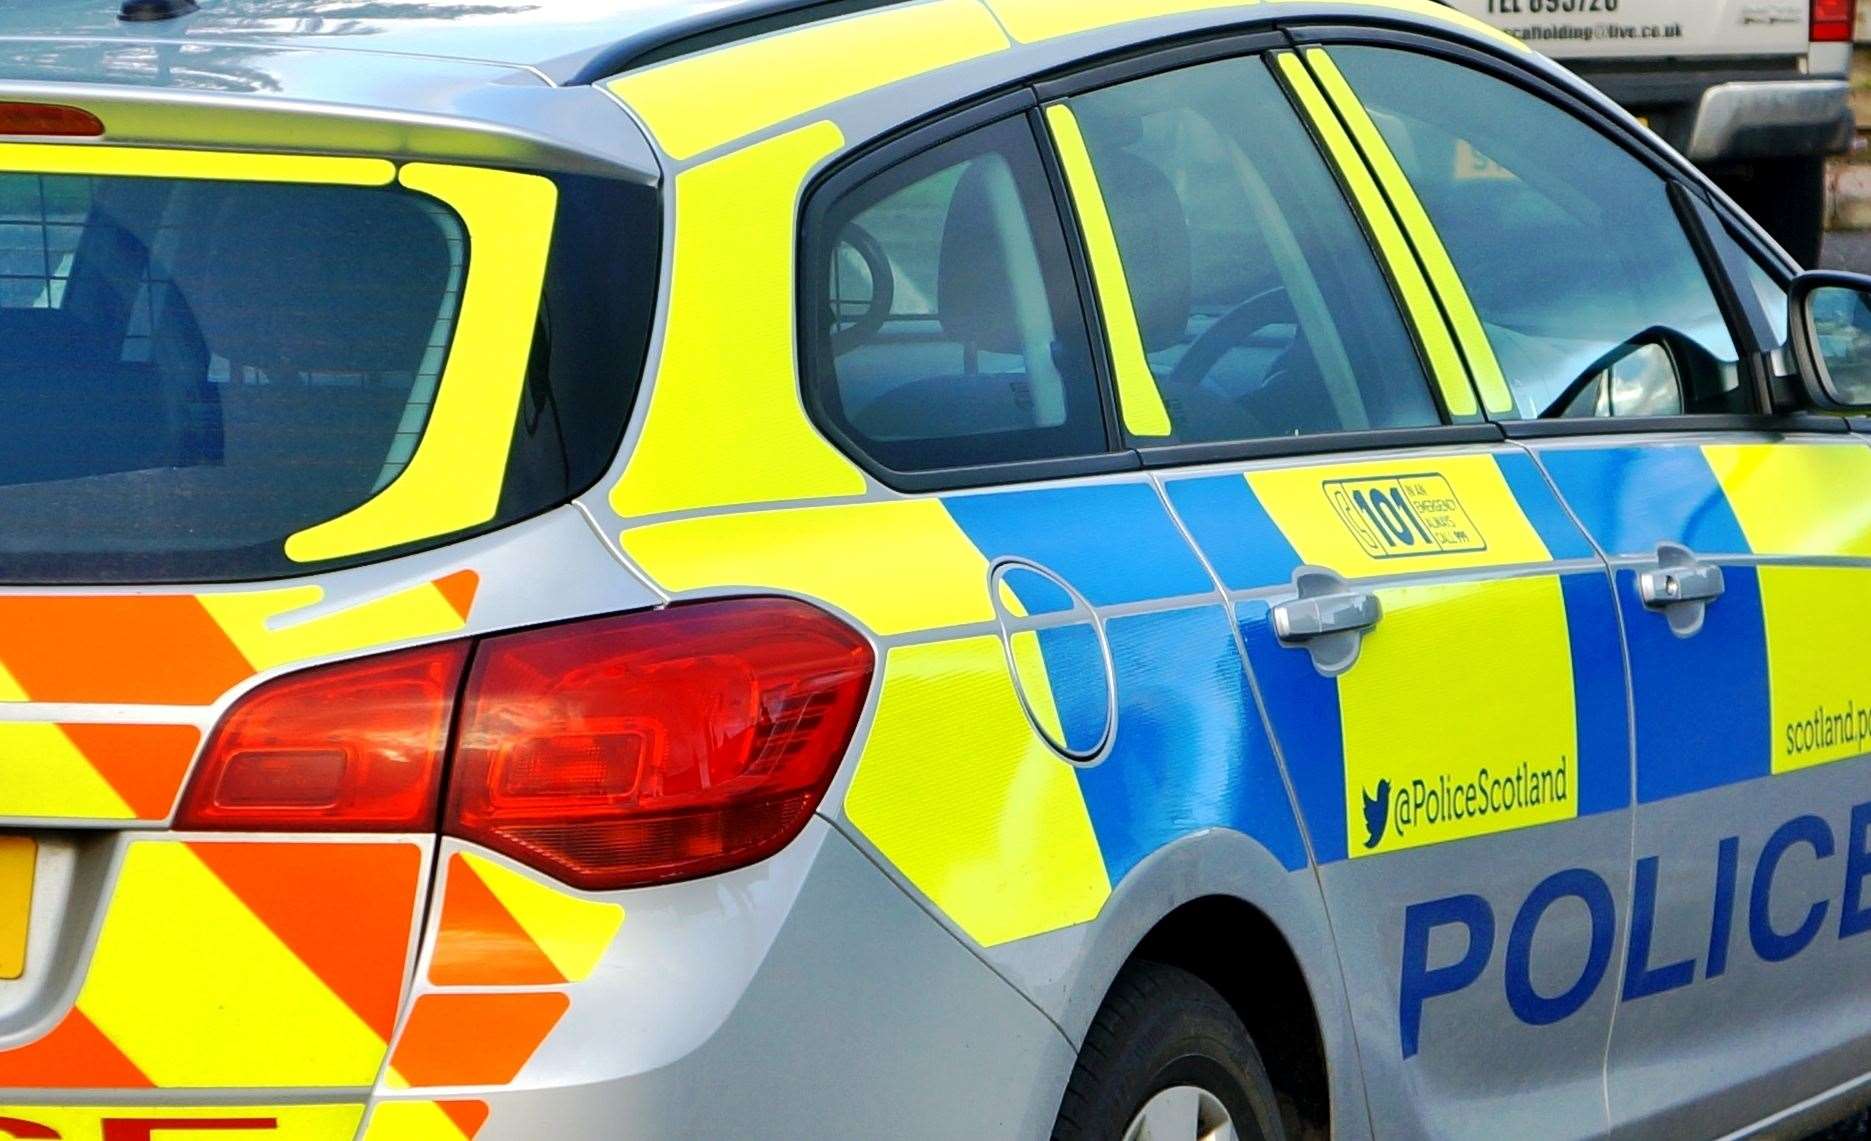 Police targeted drivers on the NC500 over two days this month.